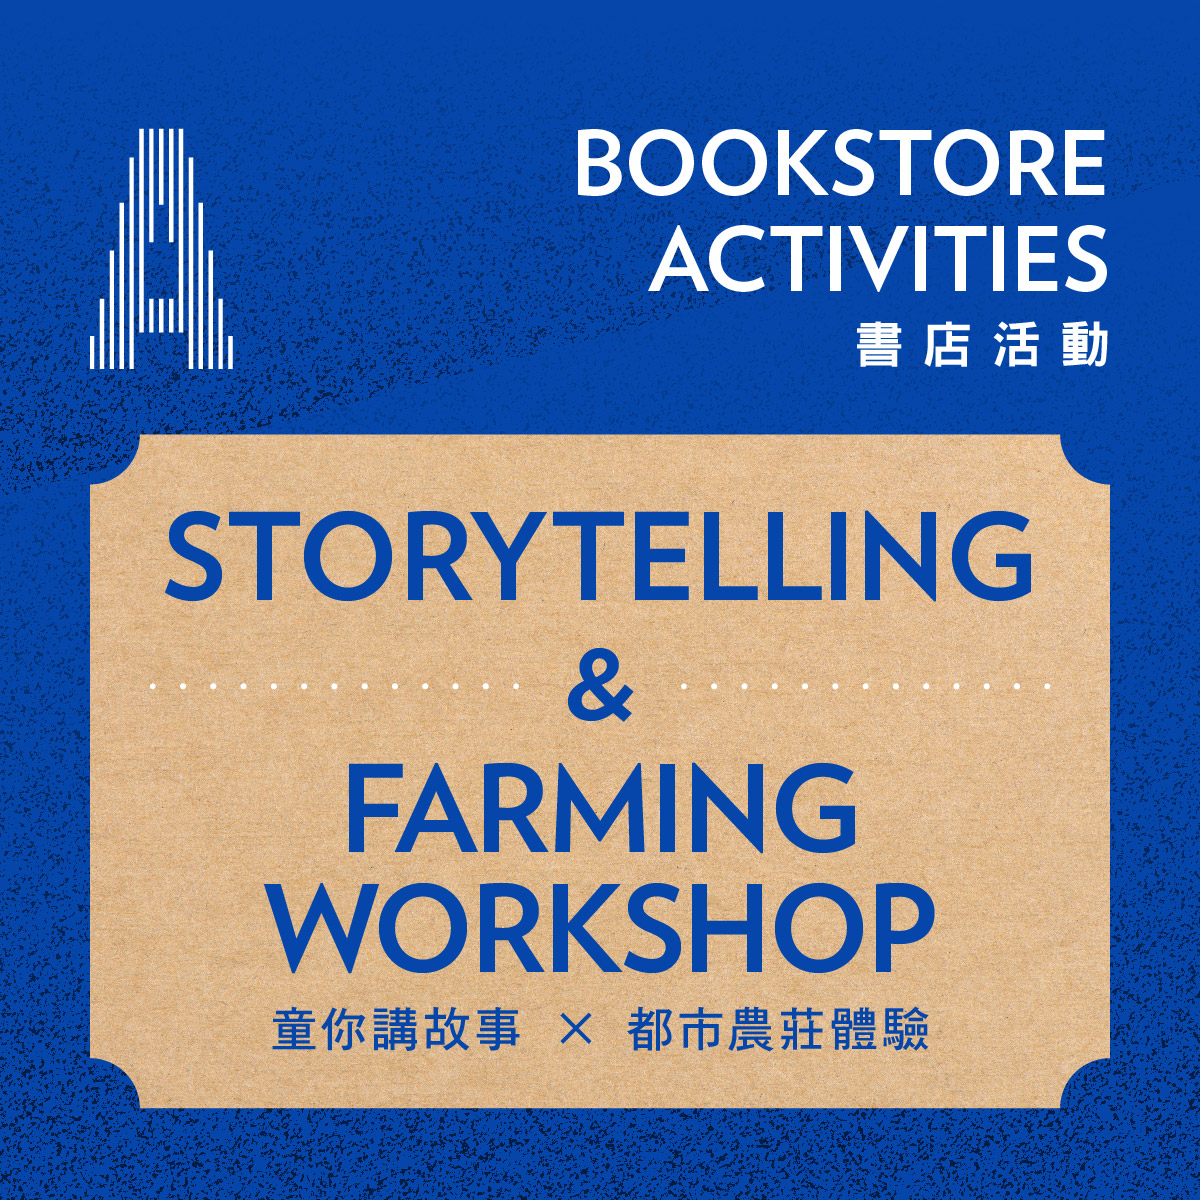 A Bookstore : Storytelling and AIRSIDE Farming Workshop